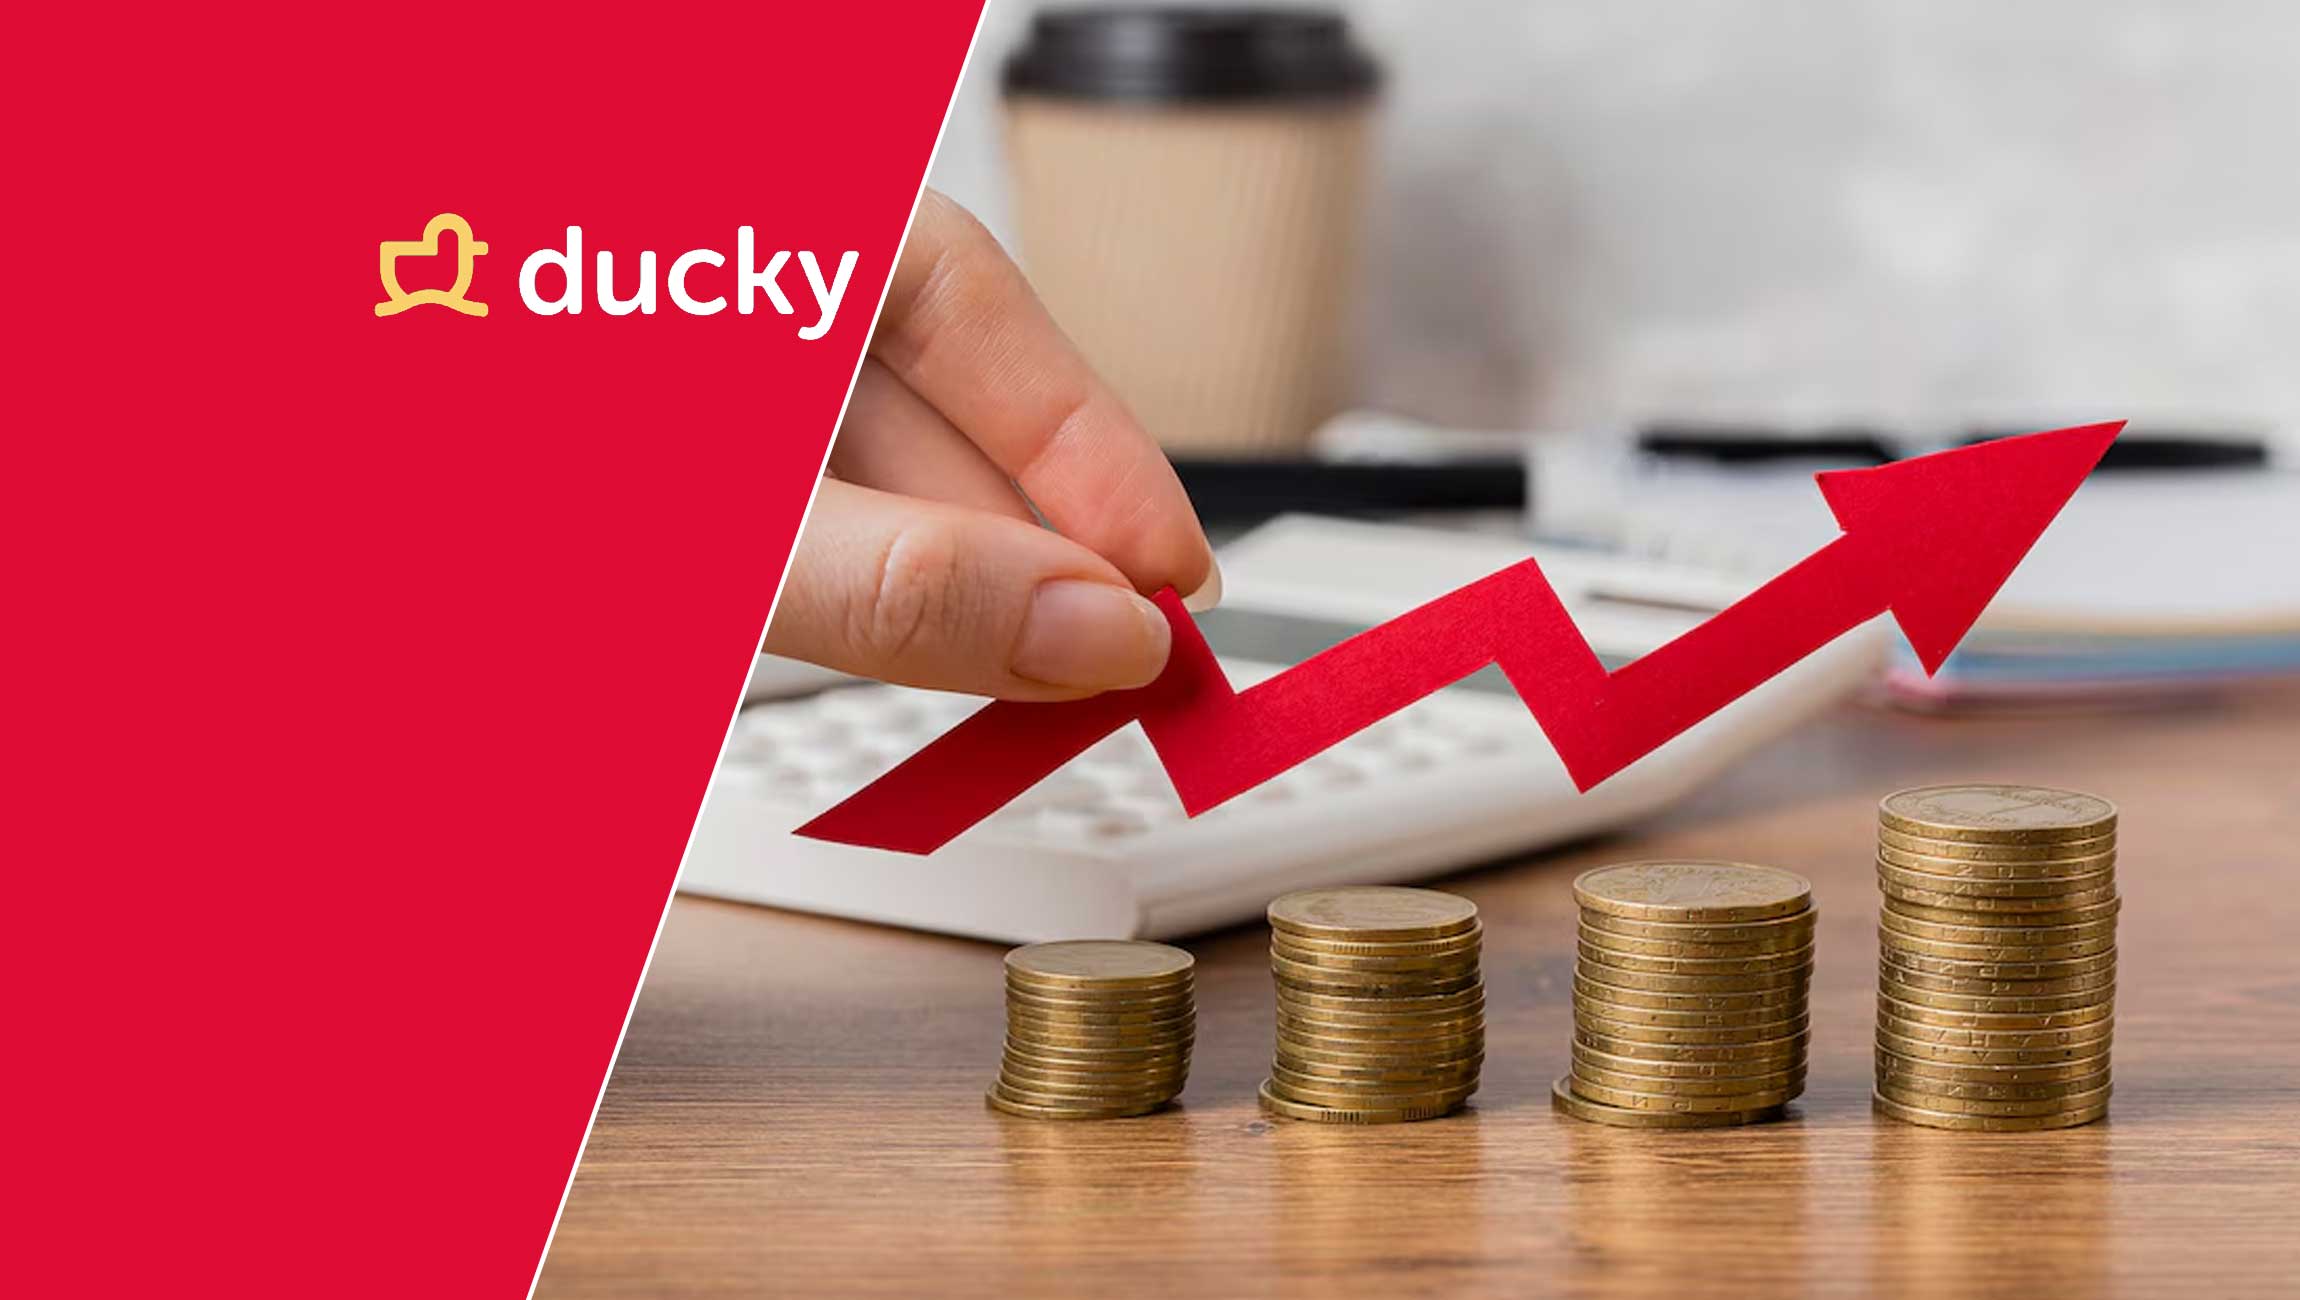 Ducky Raises $2.7M in Pre-Seed Funding, Puts AI to Work for Customer Support Teams